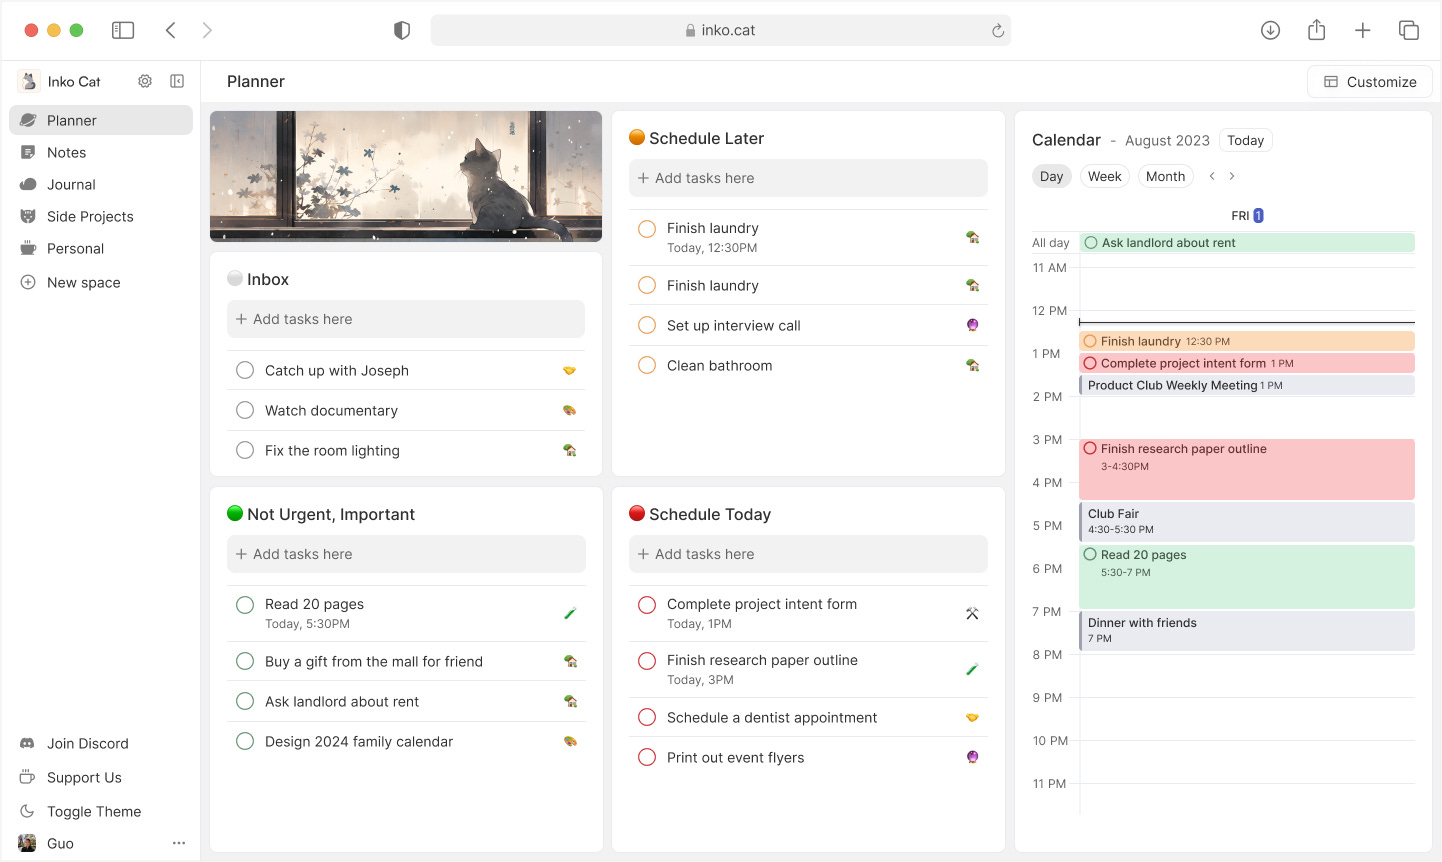 Dashboard with an image, four task list blocks for inbox, not urgent, schedule later, and schedule today tasks and a calendar